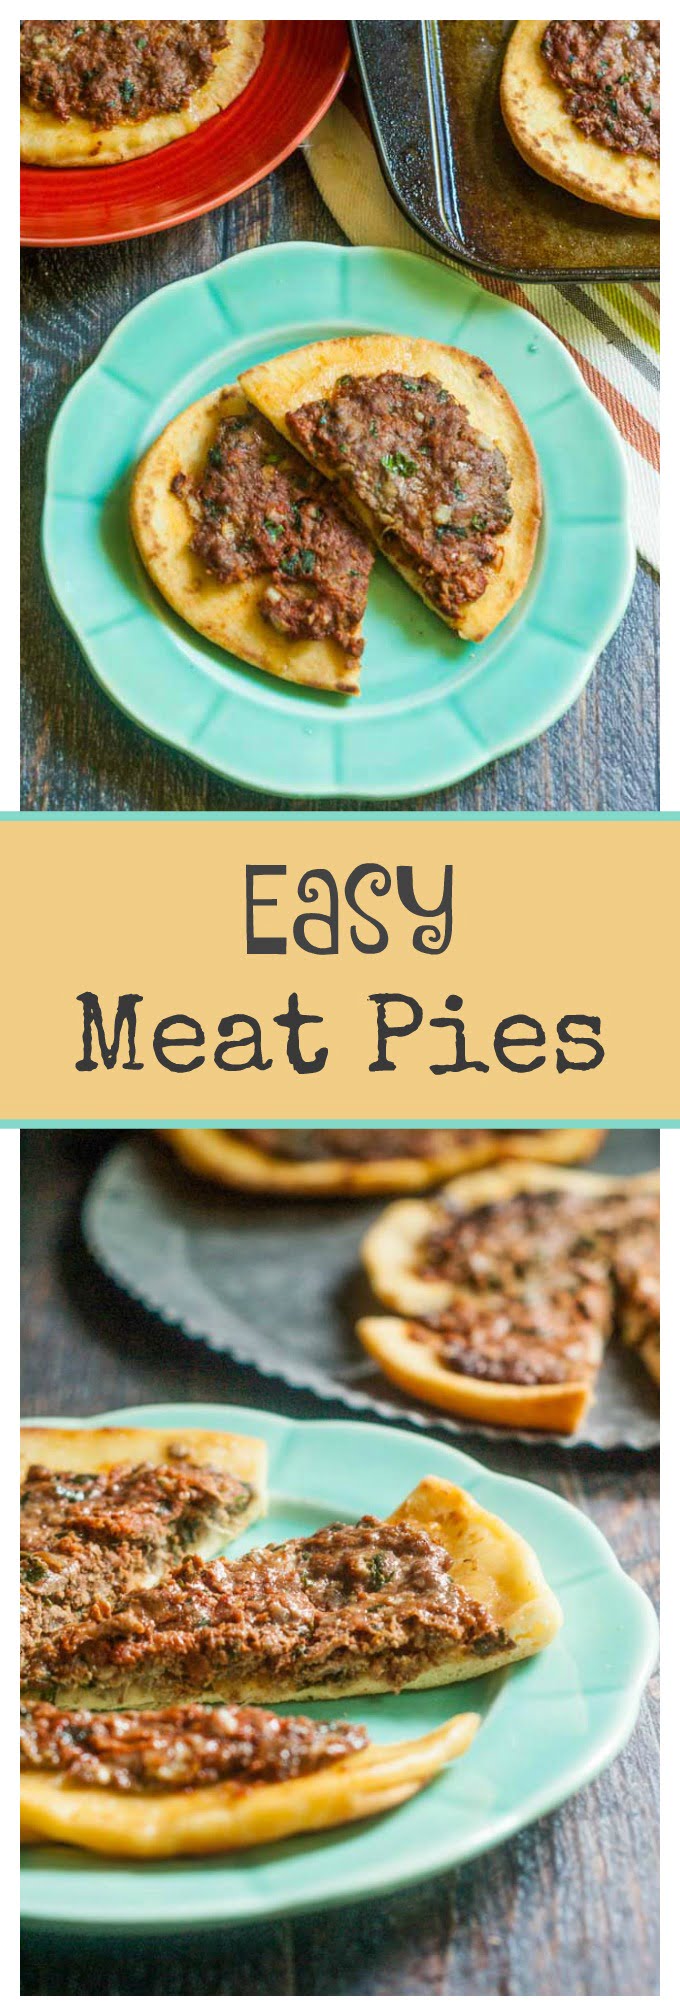 These easy meat pies are full of flavor and make a delicious change of pace for a week night dinner.